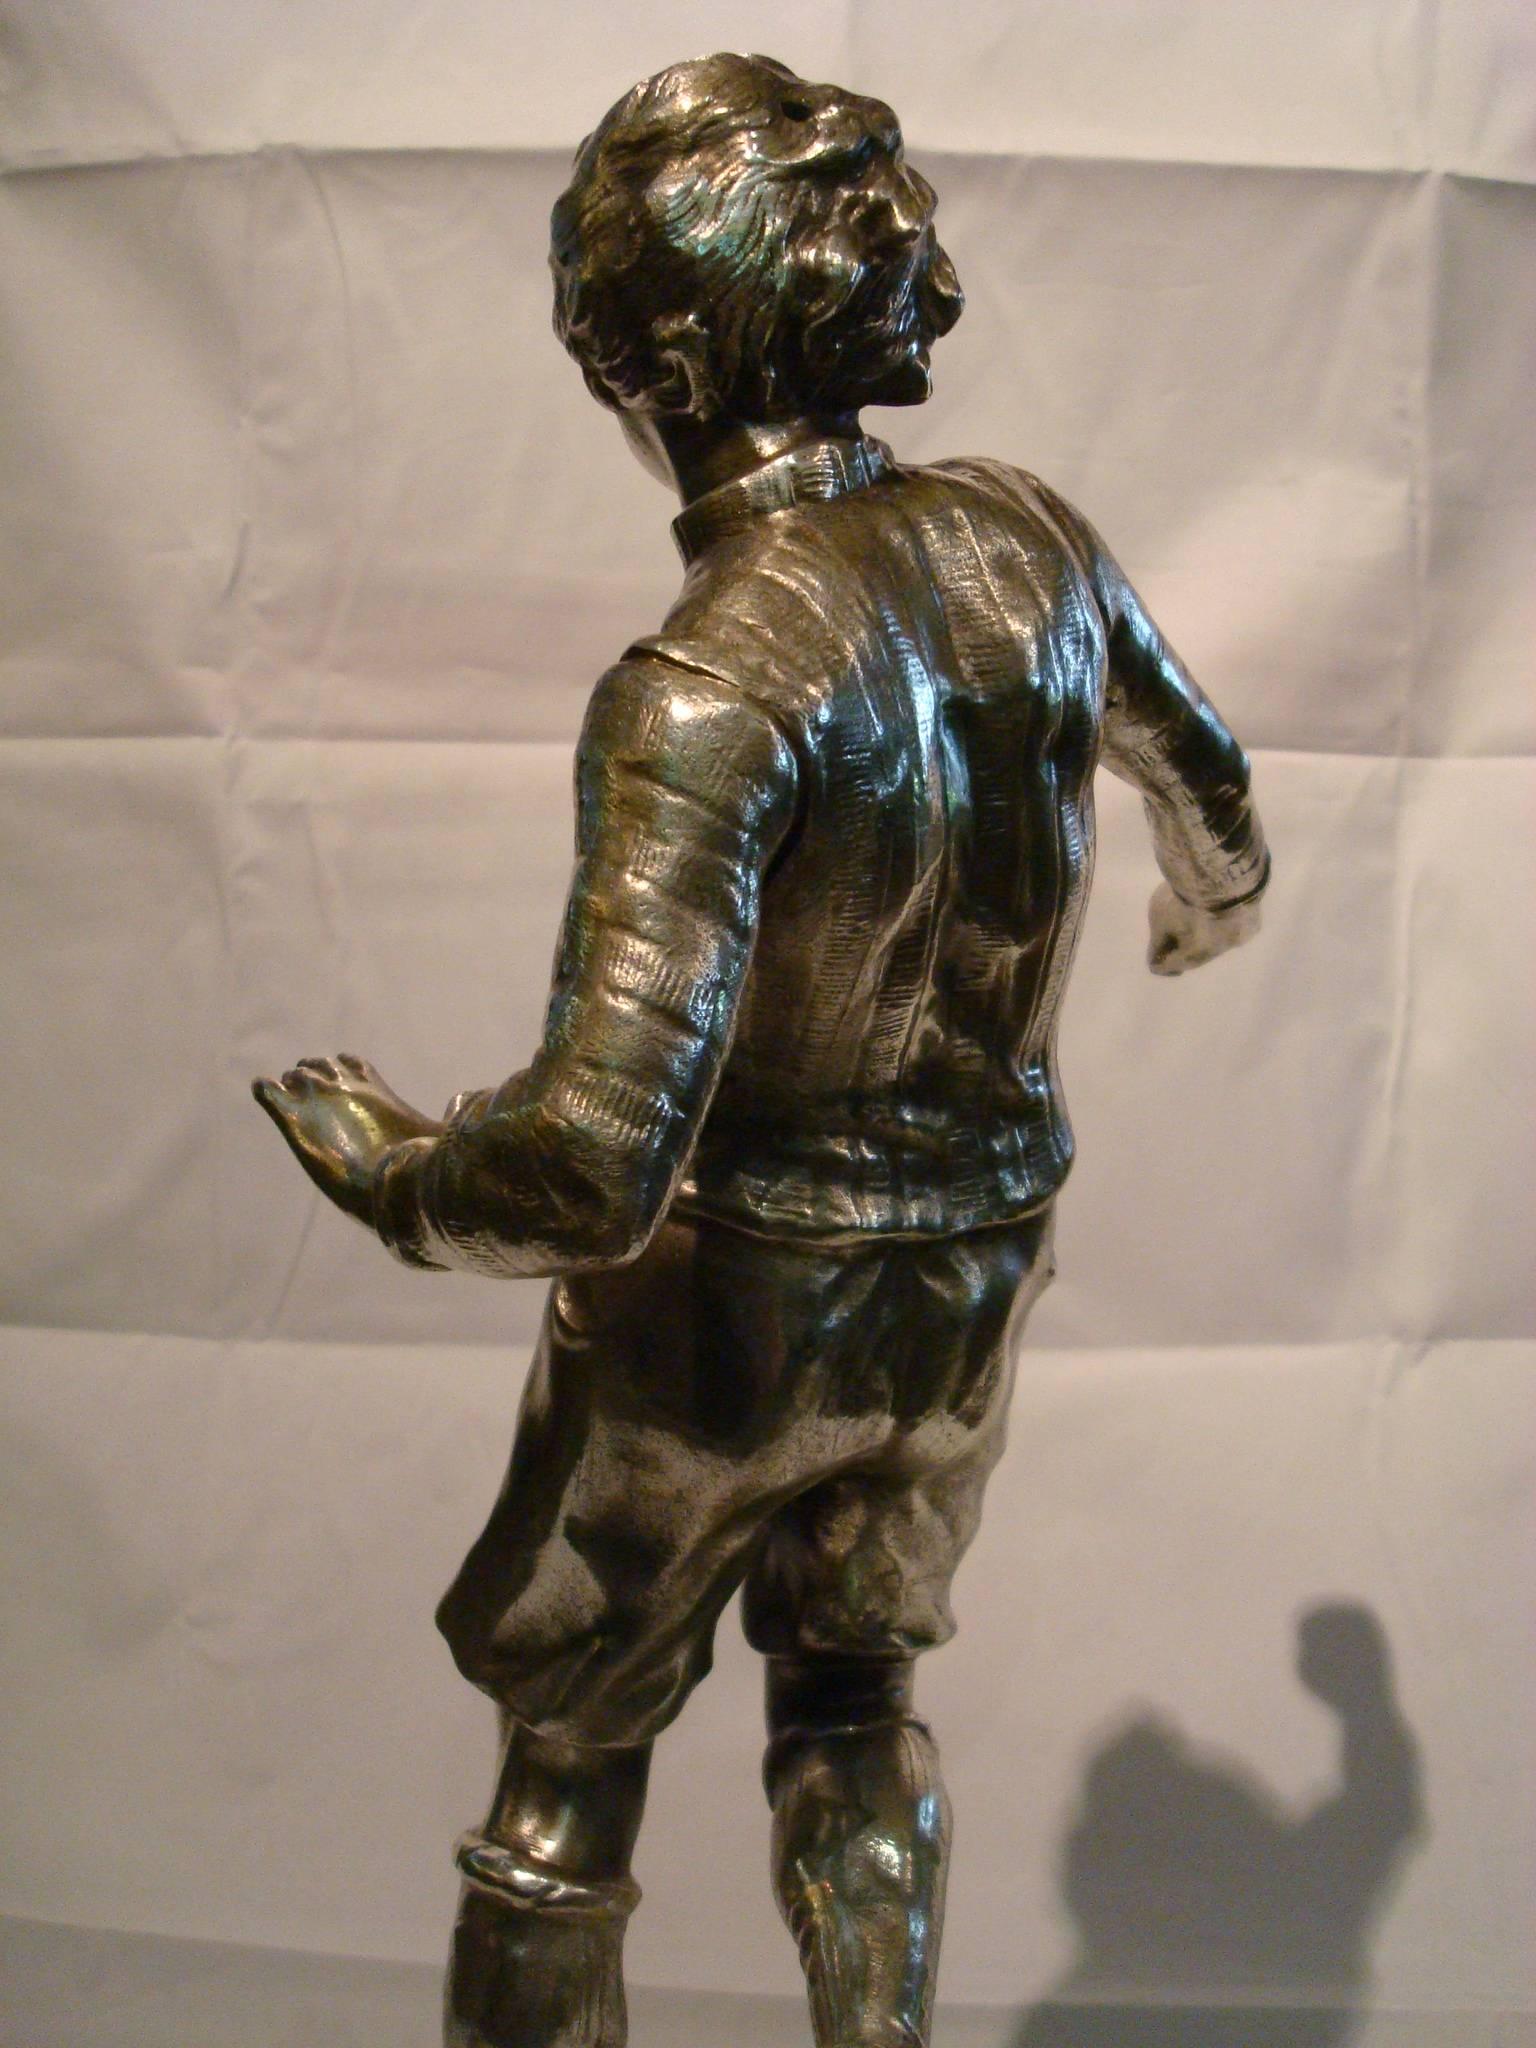 French Soccer or Football player Figure, Sculpture or Trophy, France, 1920s